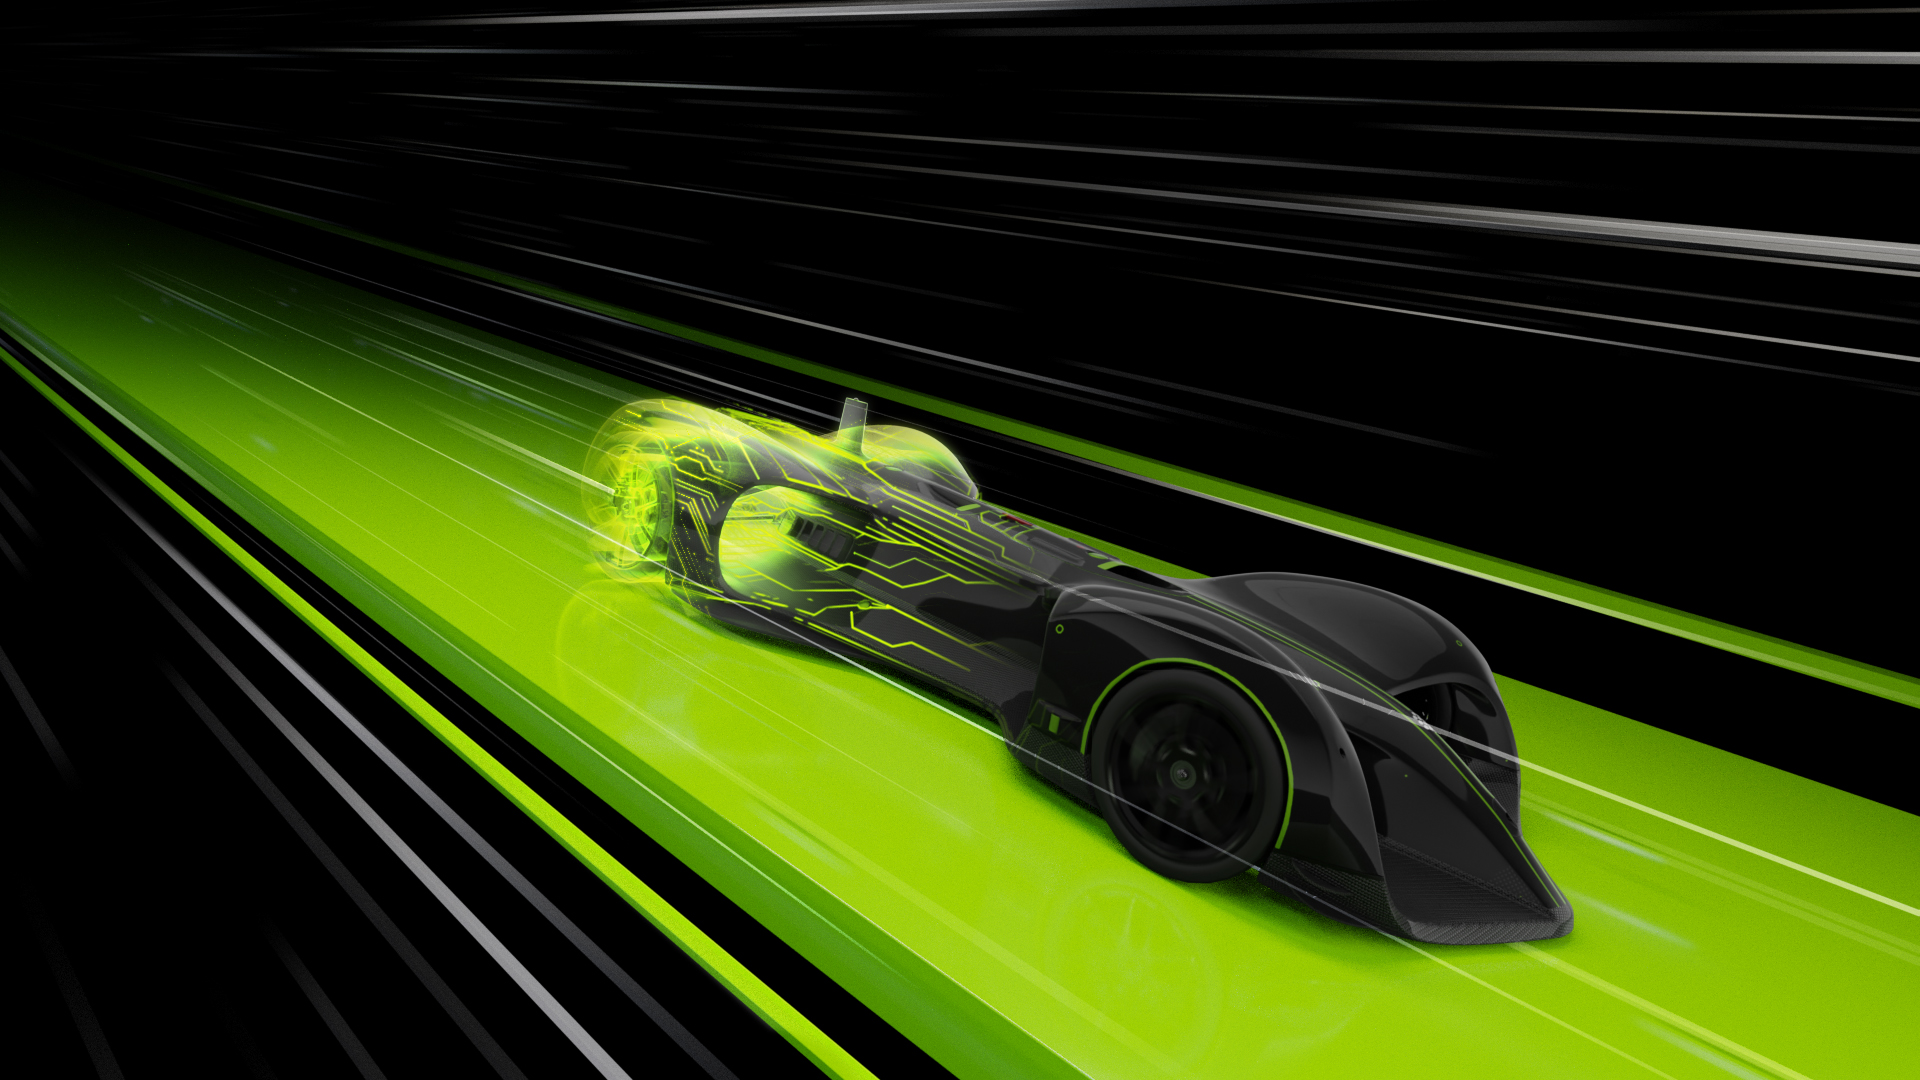 Image of a car showing that DLSS 3 is hardware-accelerated and AI-powered to create additional high quality frames.